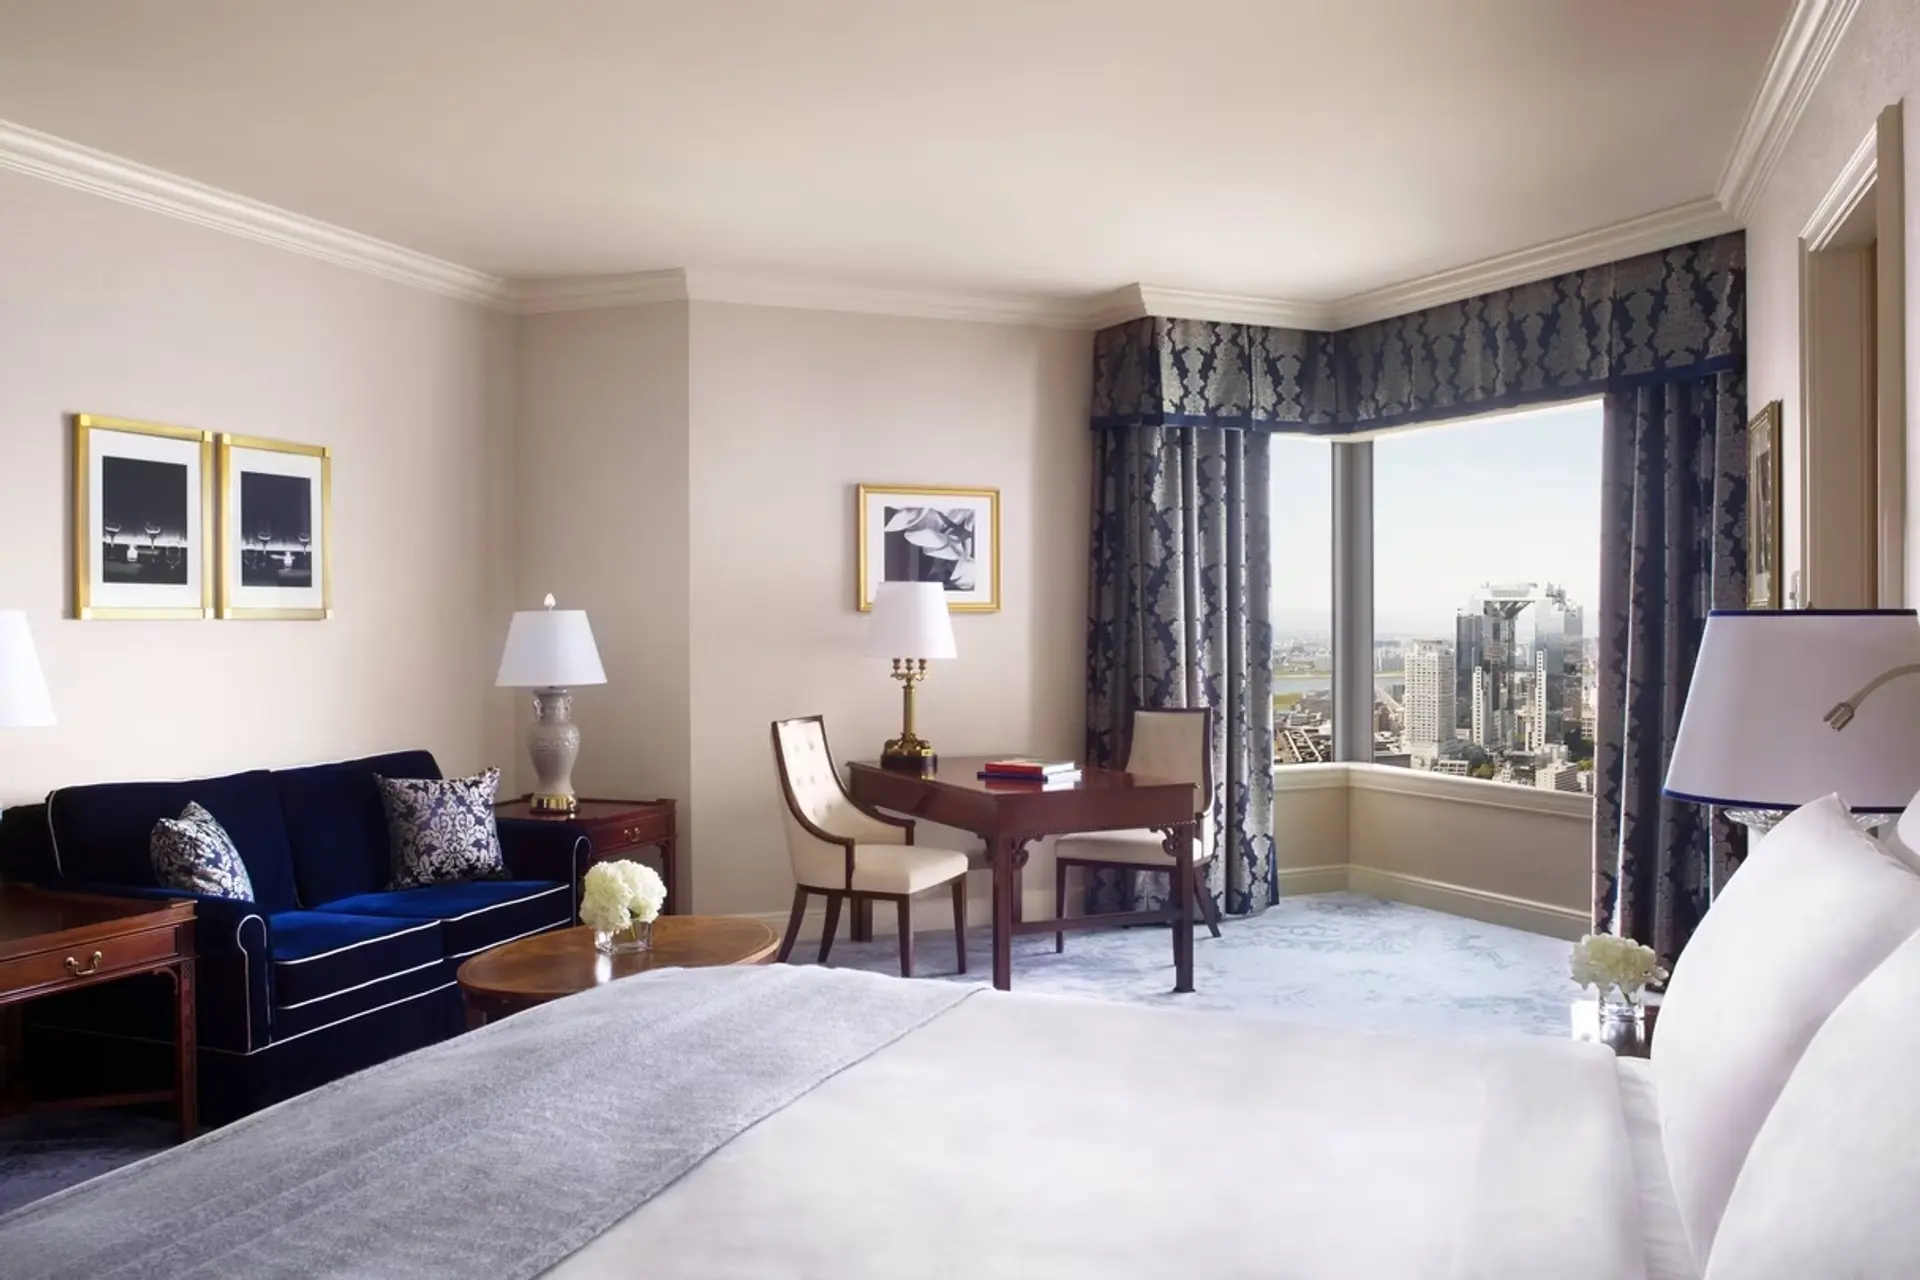 White kingsize bed, blue sofas, brown table, and view to Osaka at The Ritz-Carlton in Osaka.